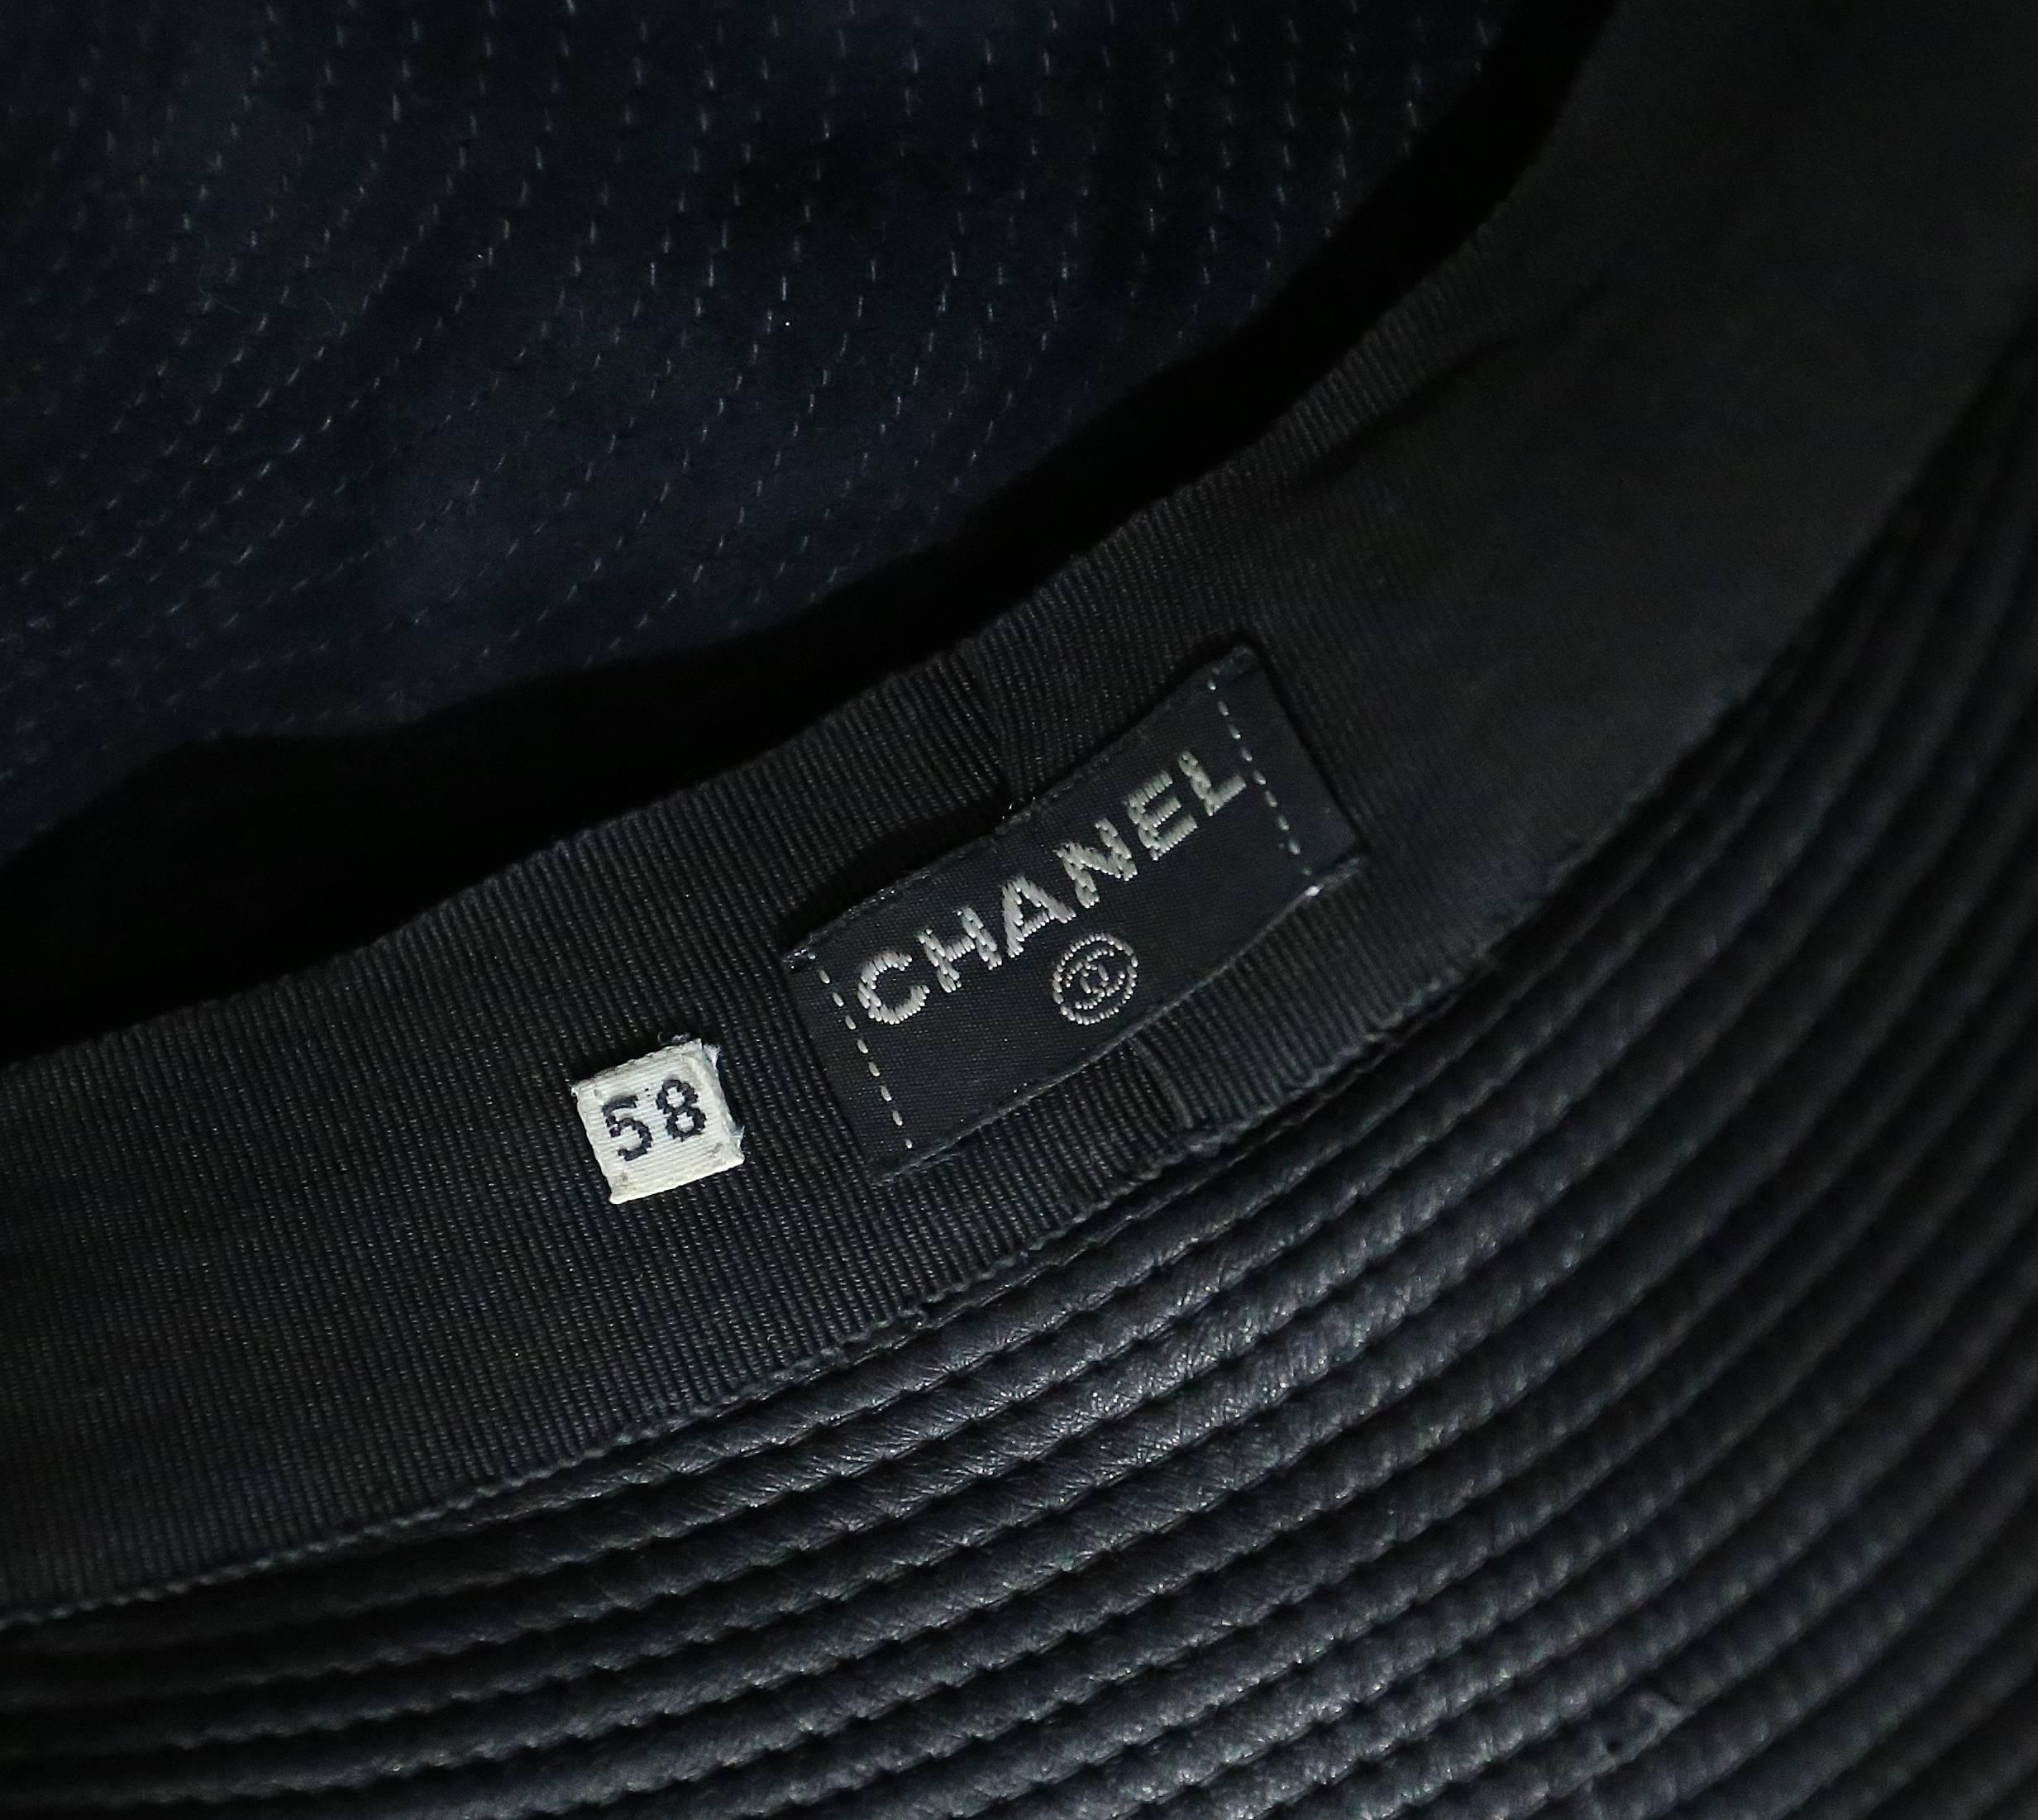 Women's Chanel black leather biker cap with extra large chain, c. 1992